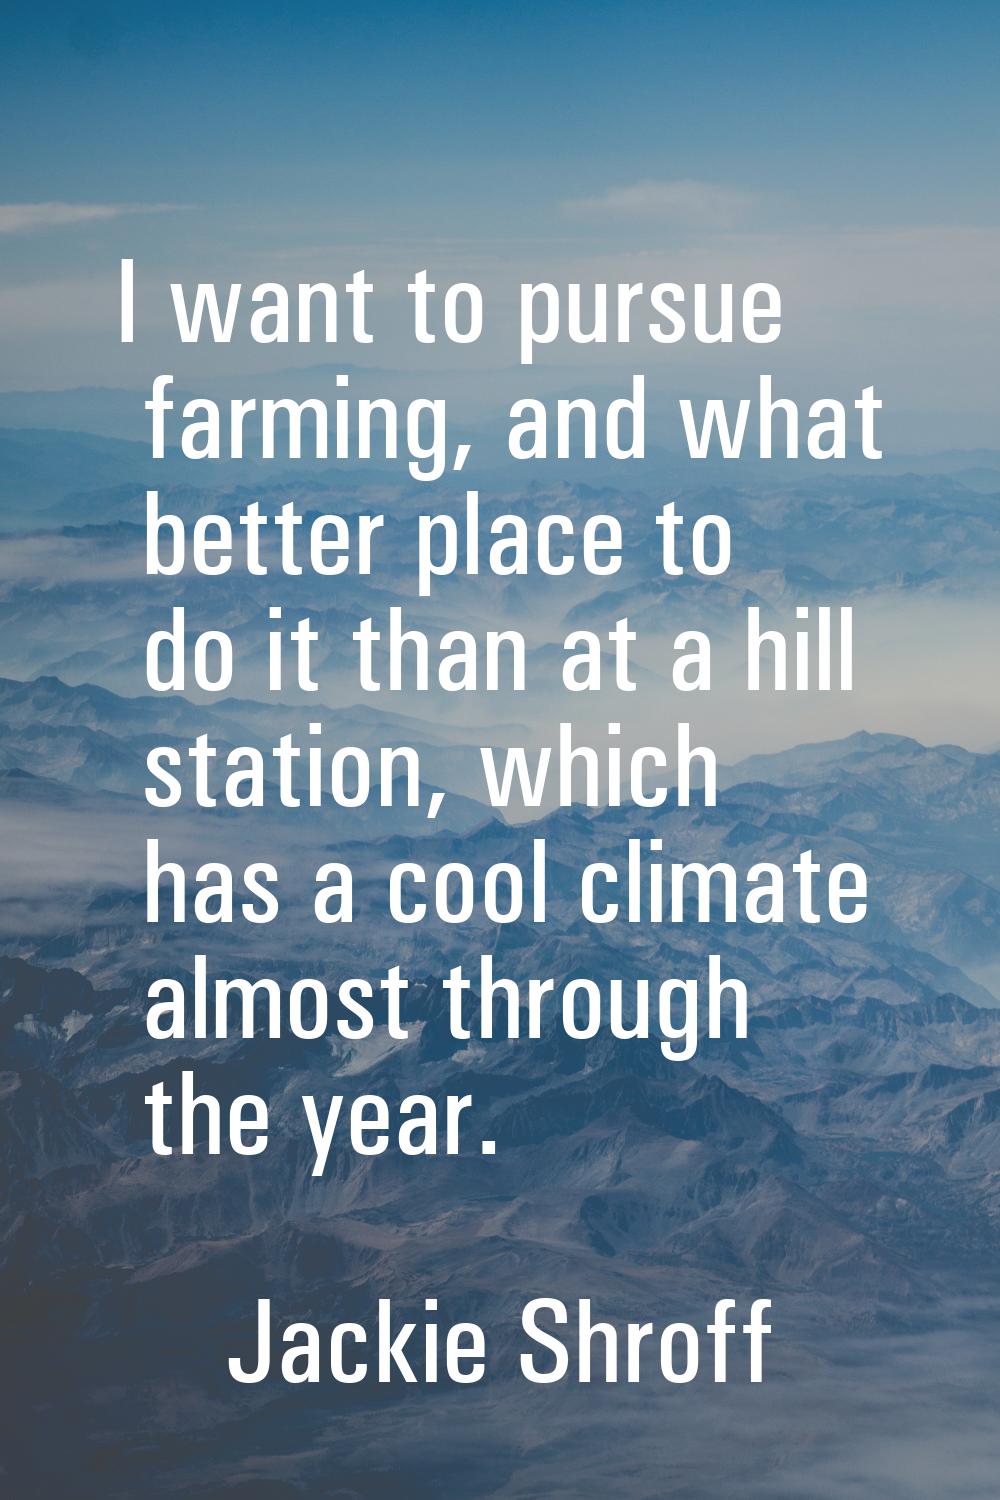 I want to pursue farming, and what better place to do it than at a hill station, which has a cool c